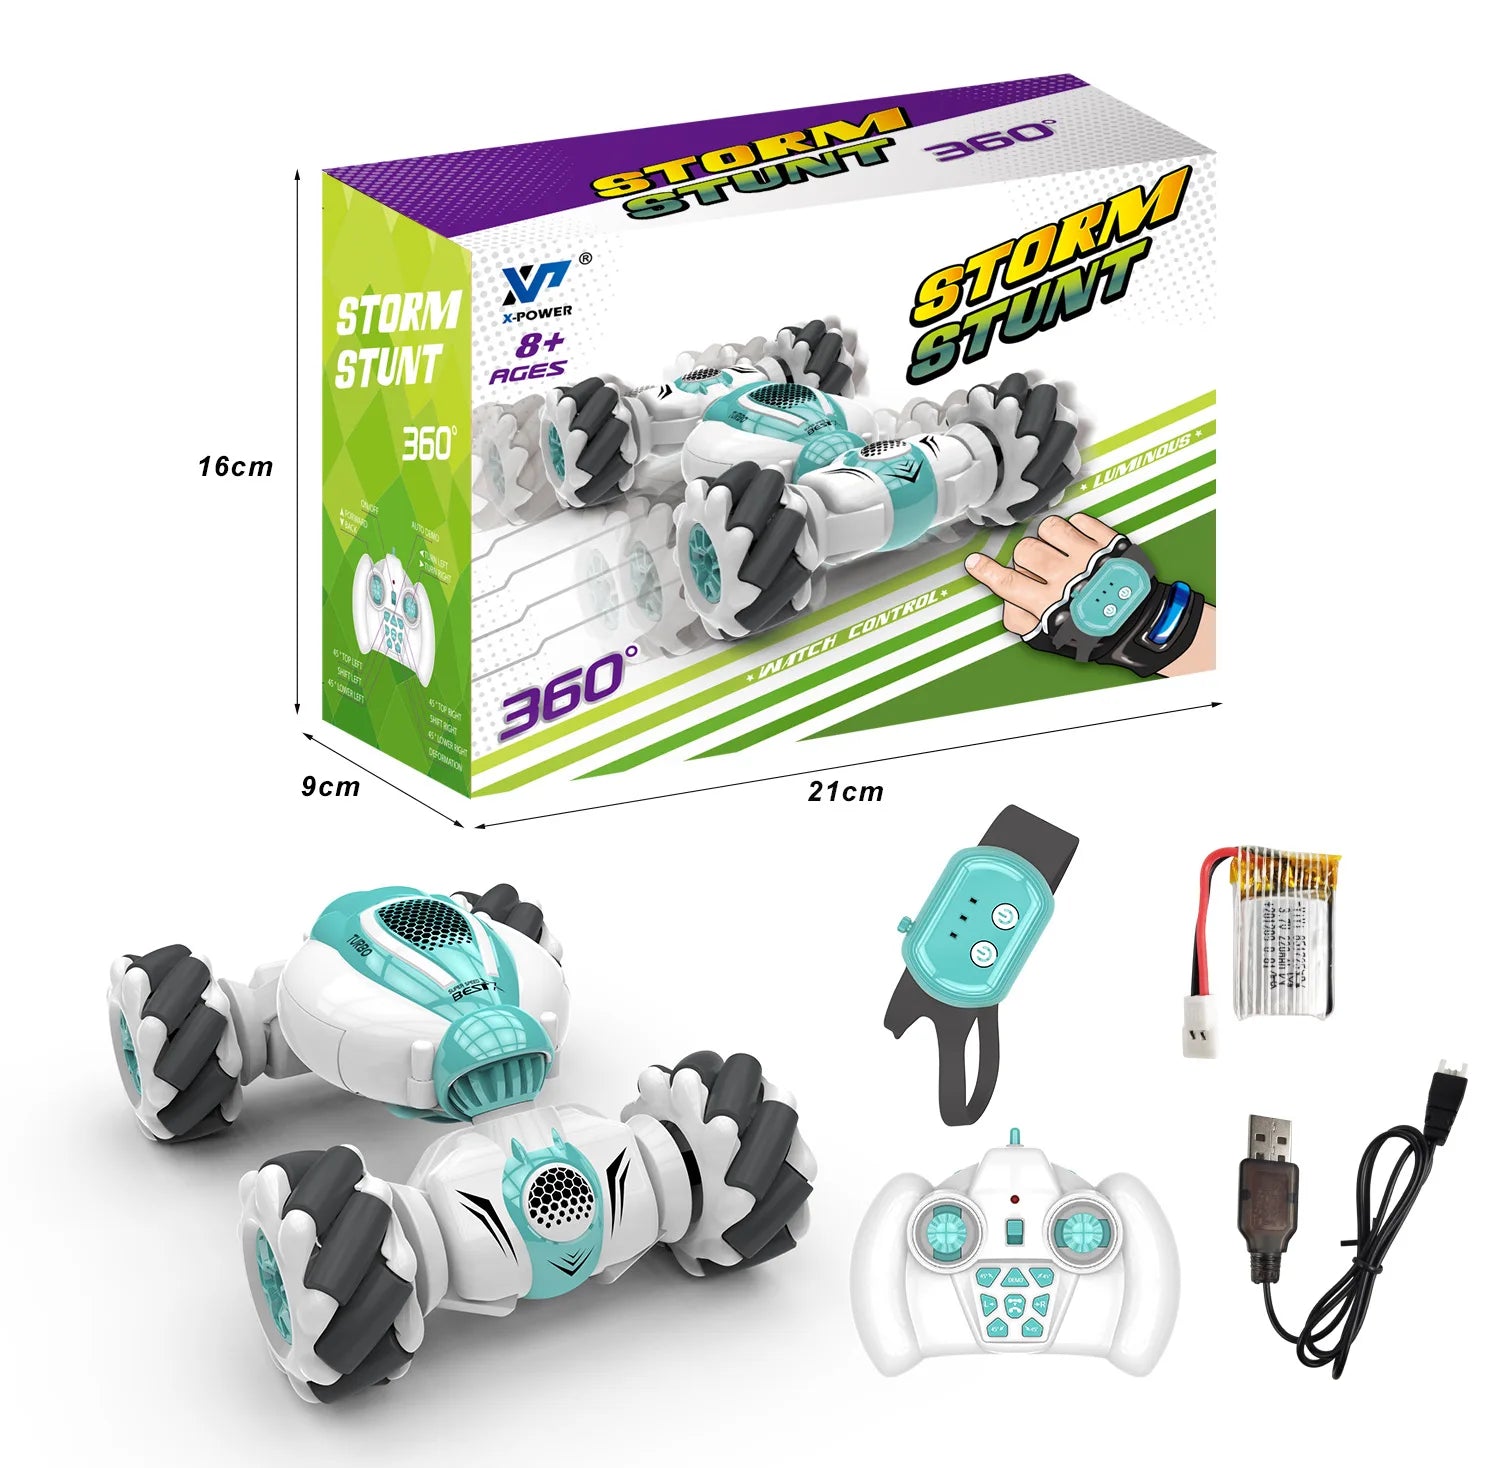 Samll RC Stunt Car, just press the button in the middle of the controller, the car turns to another shape .